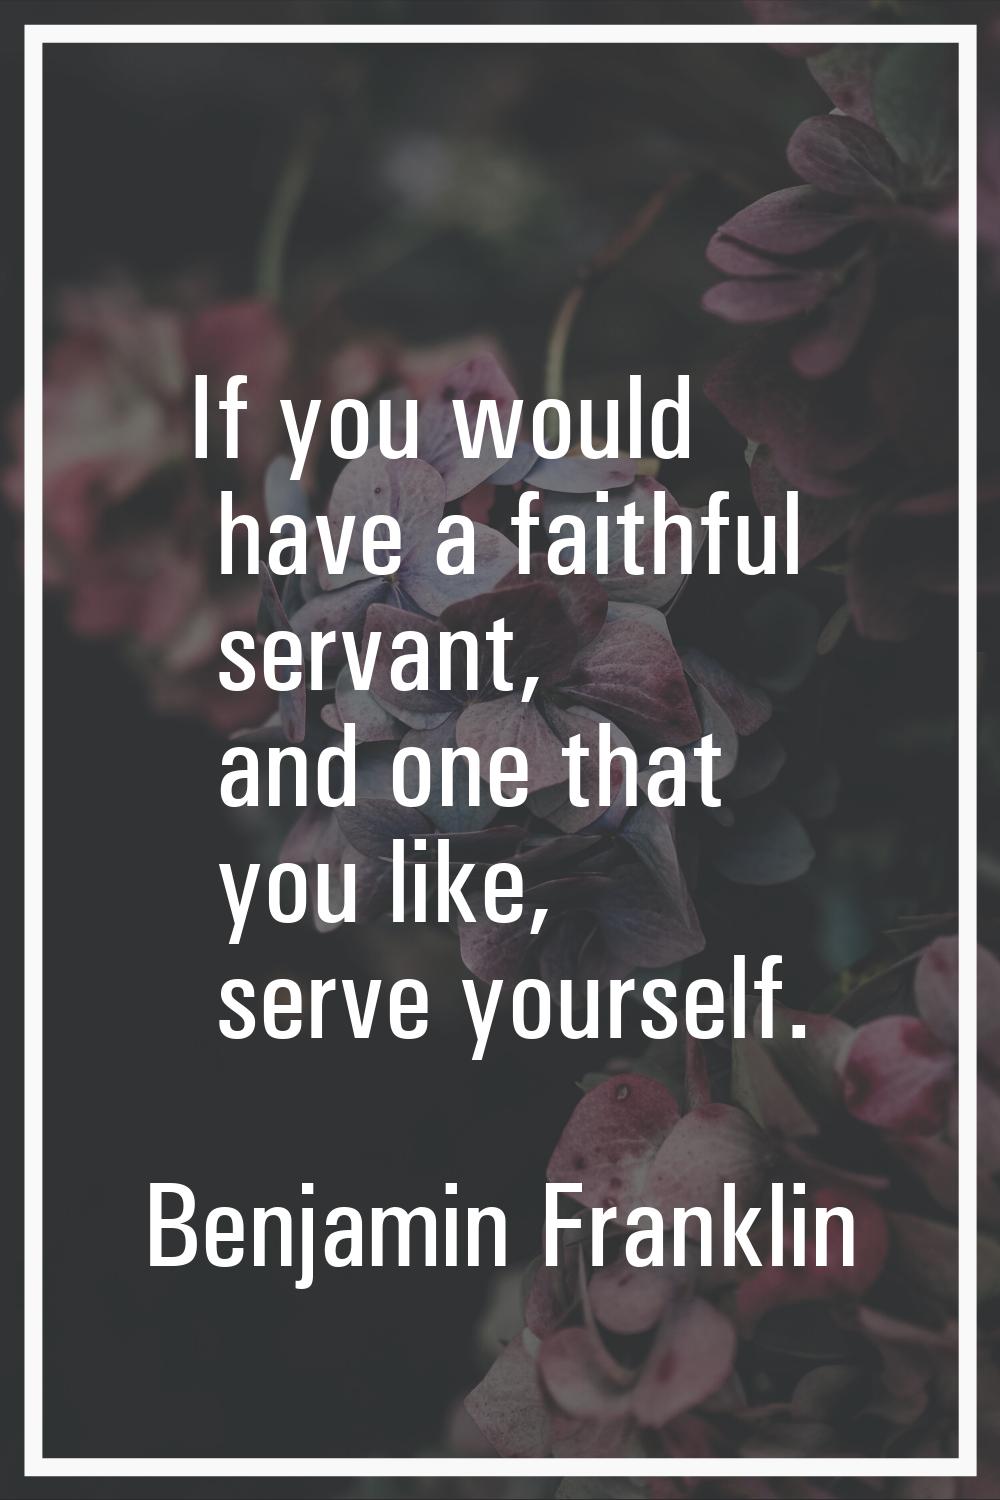 If you would have a faithful servant, and one that you like, serve yourself.